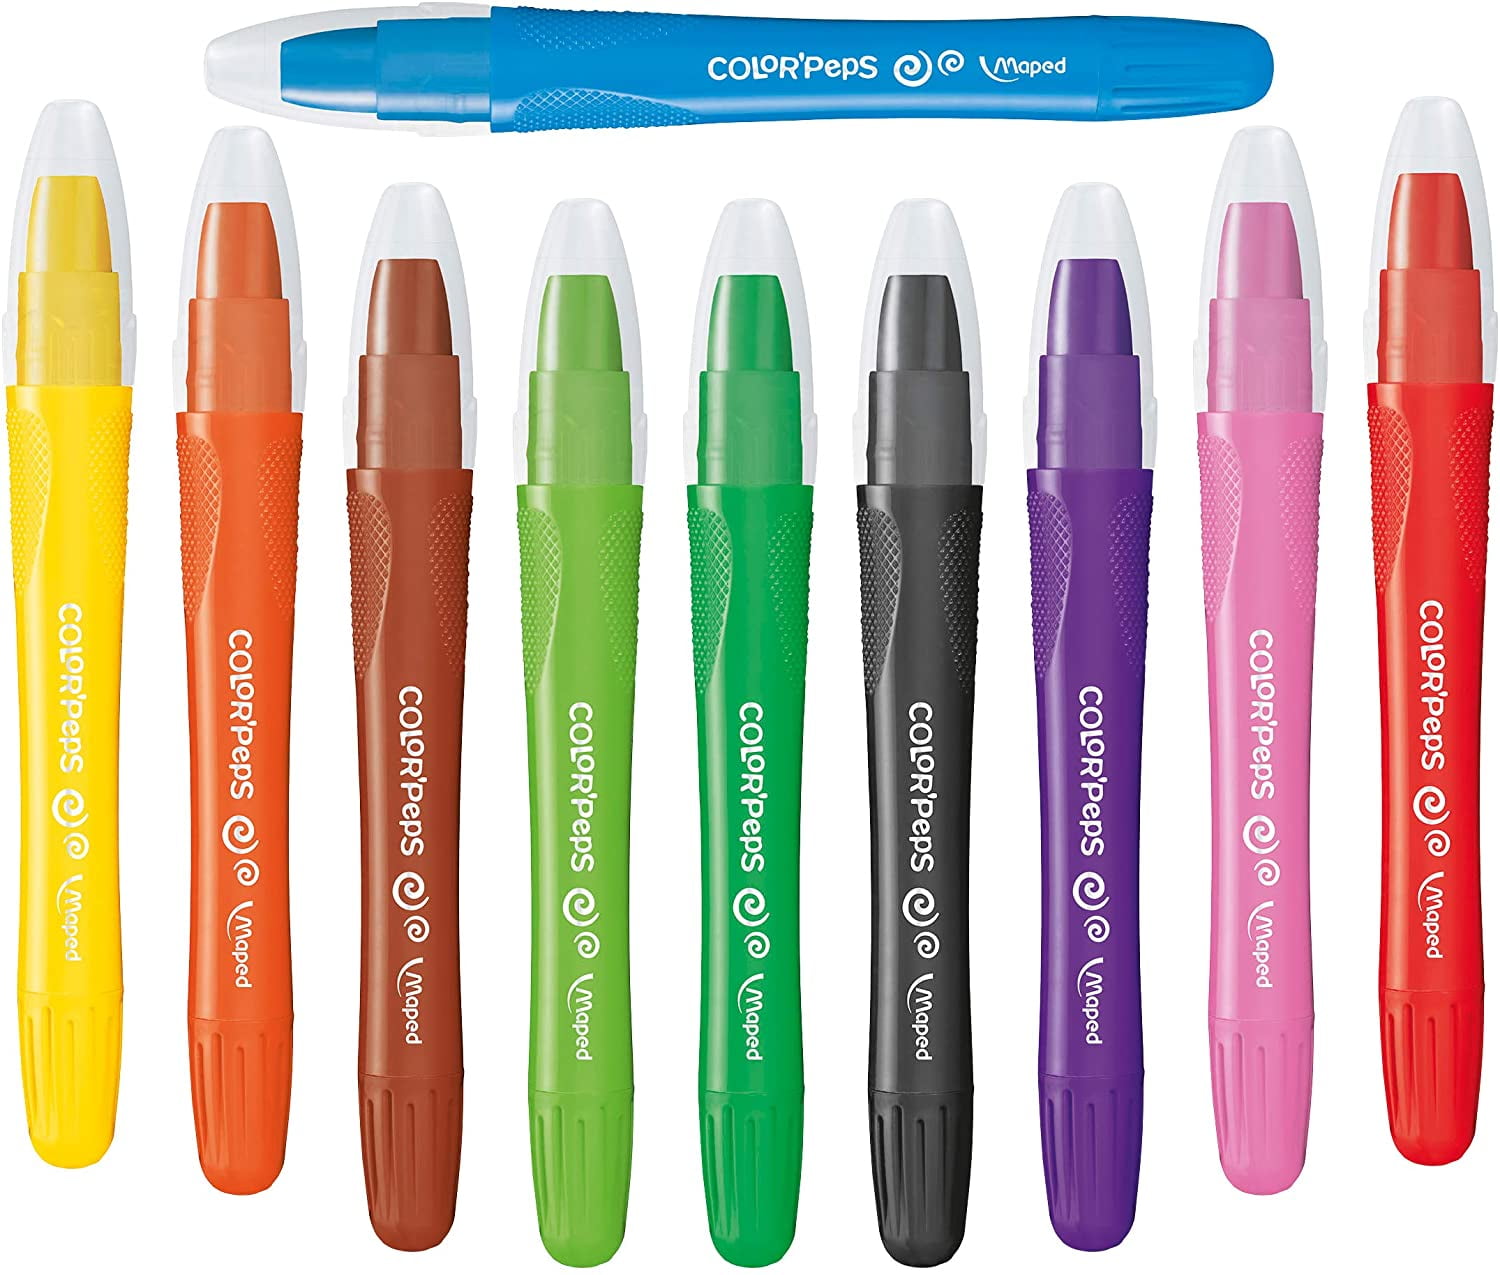 Maped Color'Peps Watercolor Gel Retractable Crayons, Pack of 10